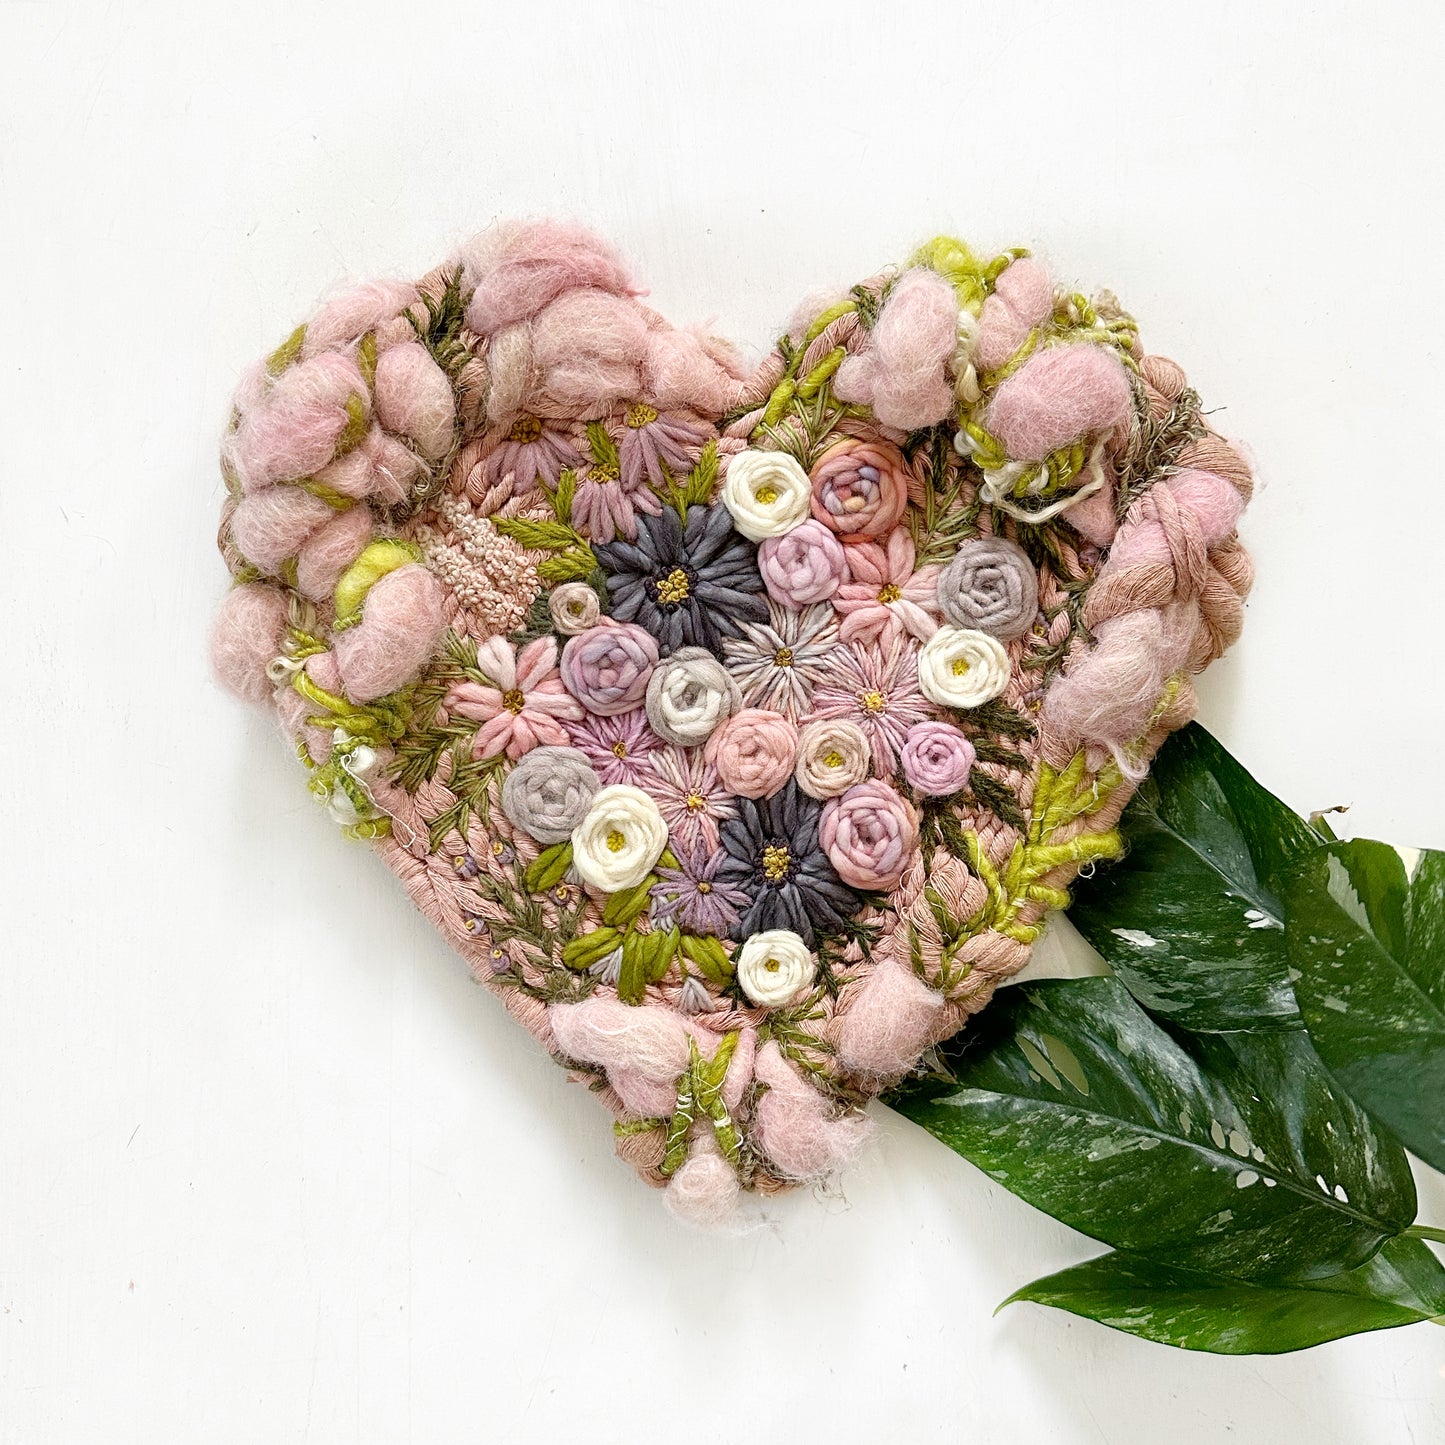 Reclamation/Woven Embroidered Heart